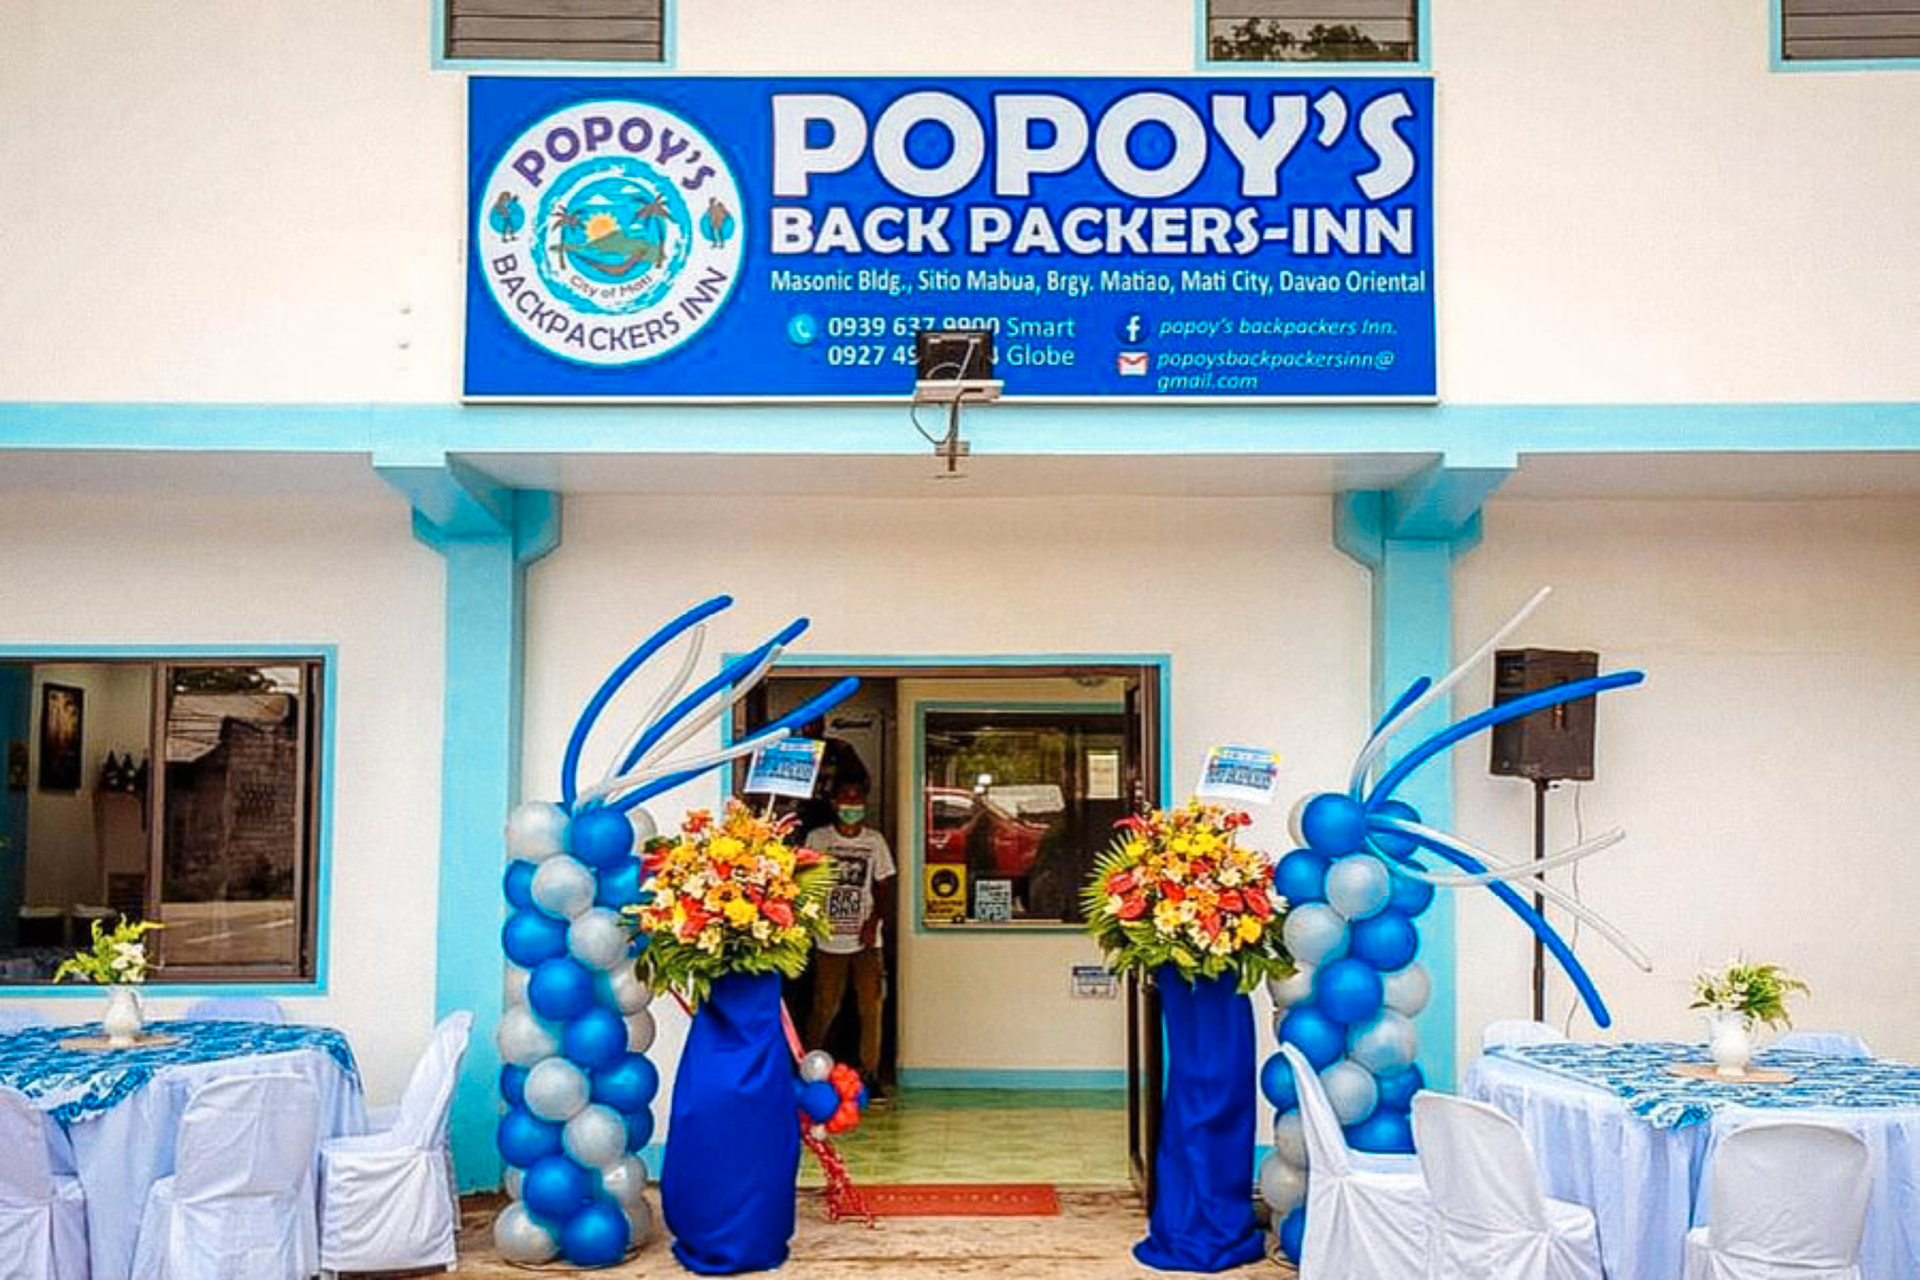 Popoy's Backpackers Mati, Mati City